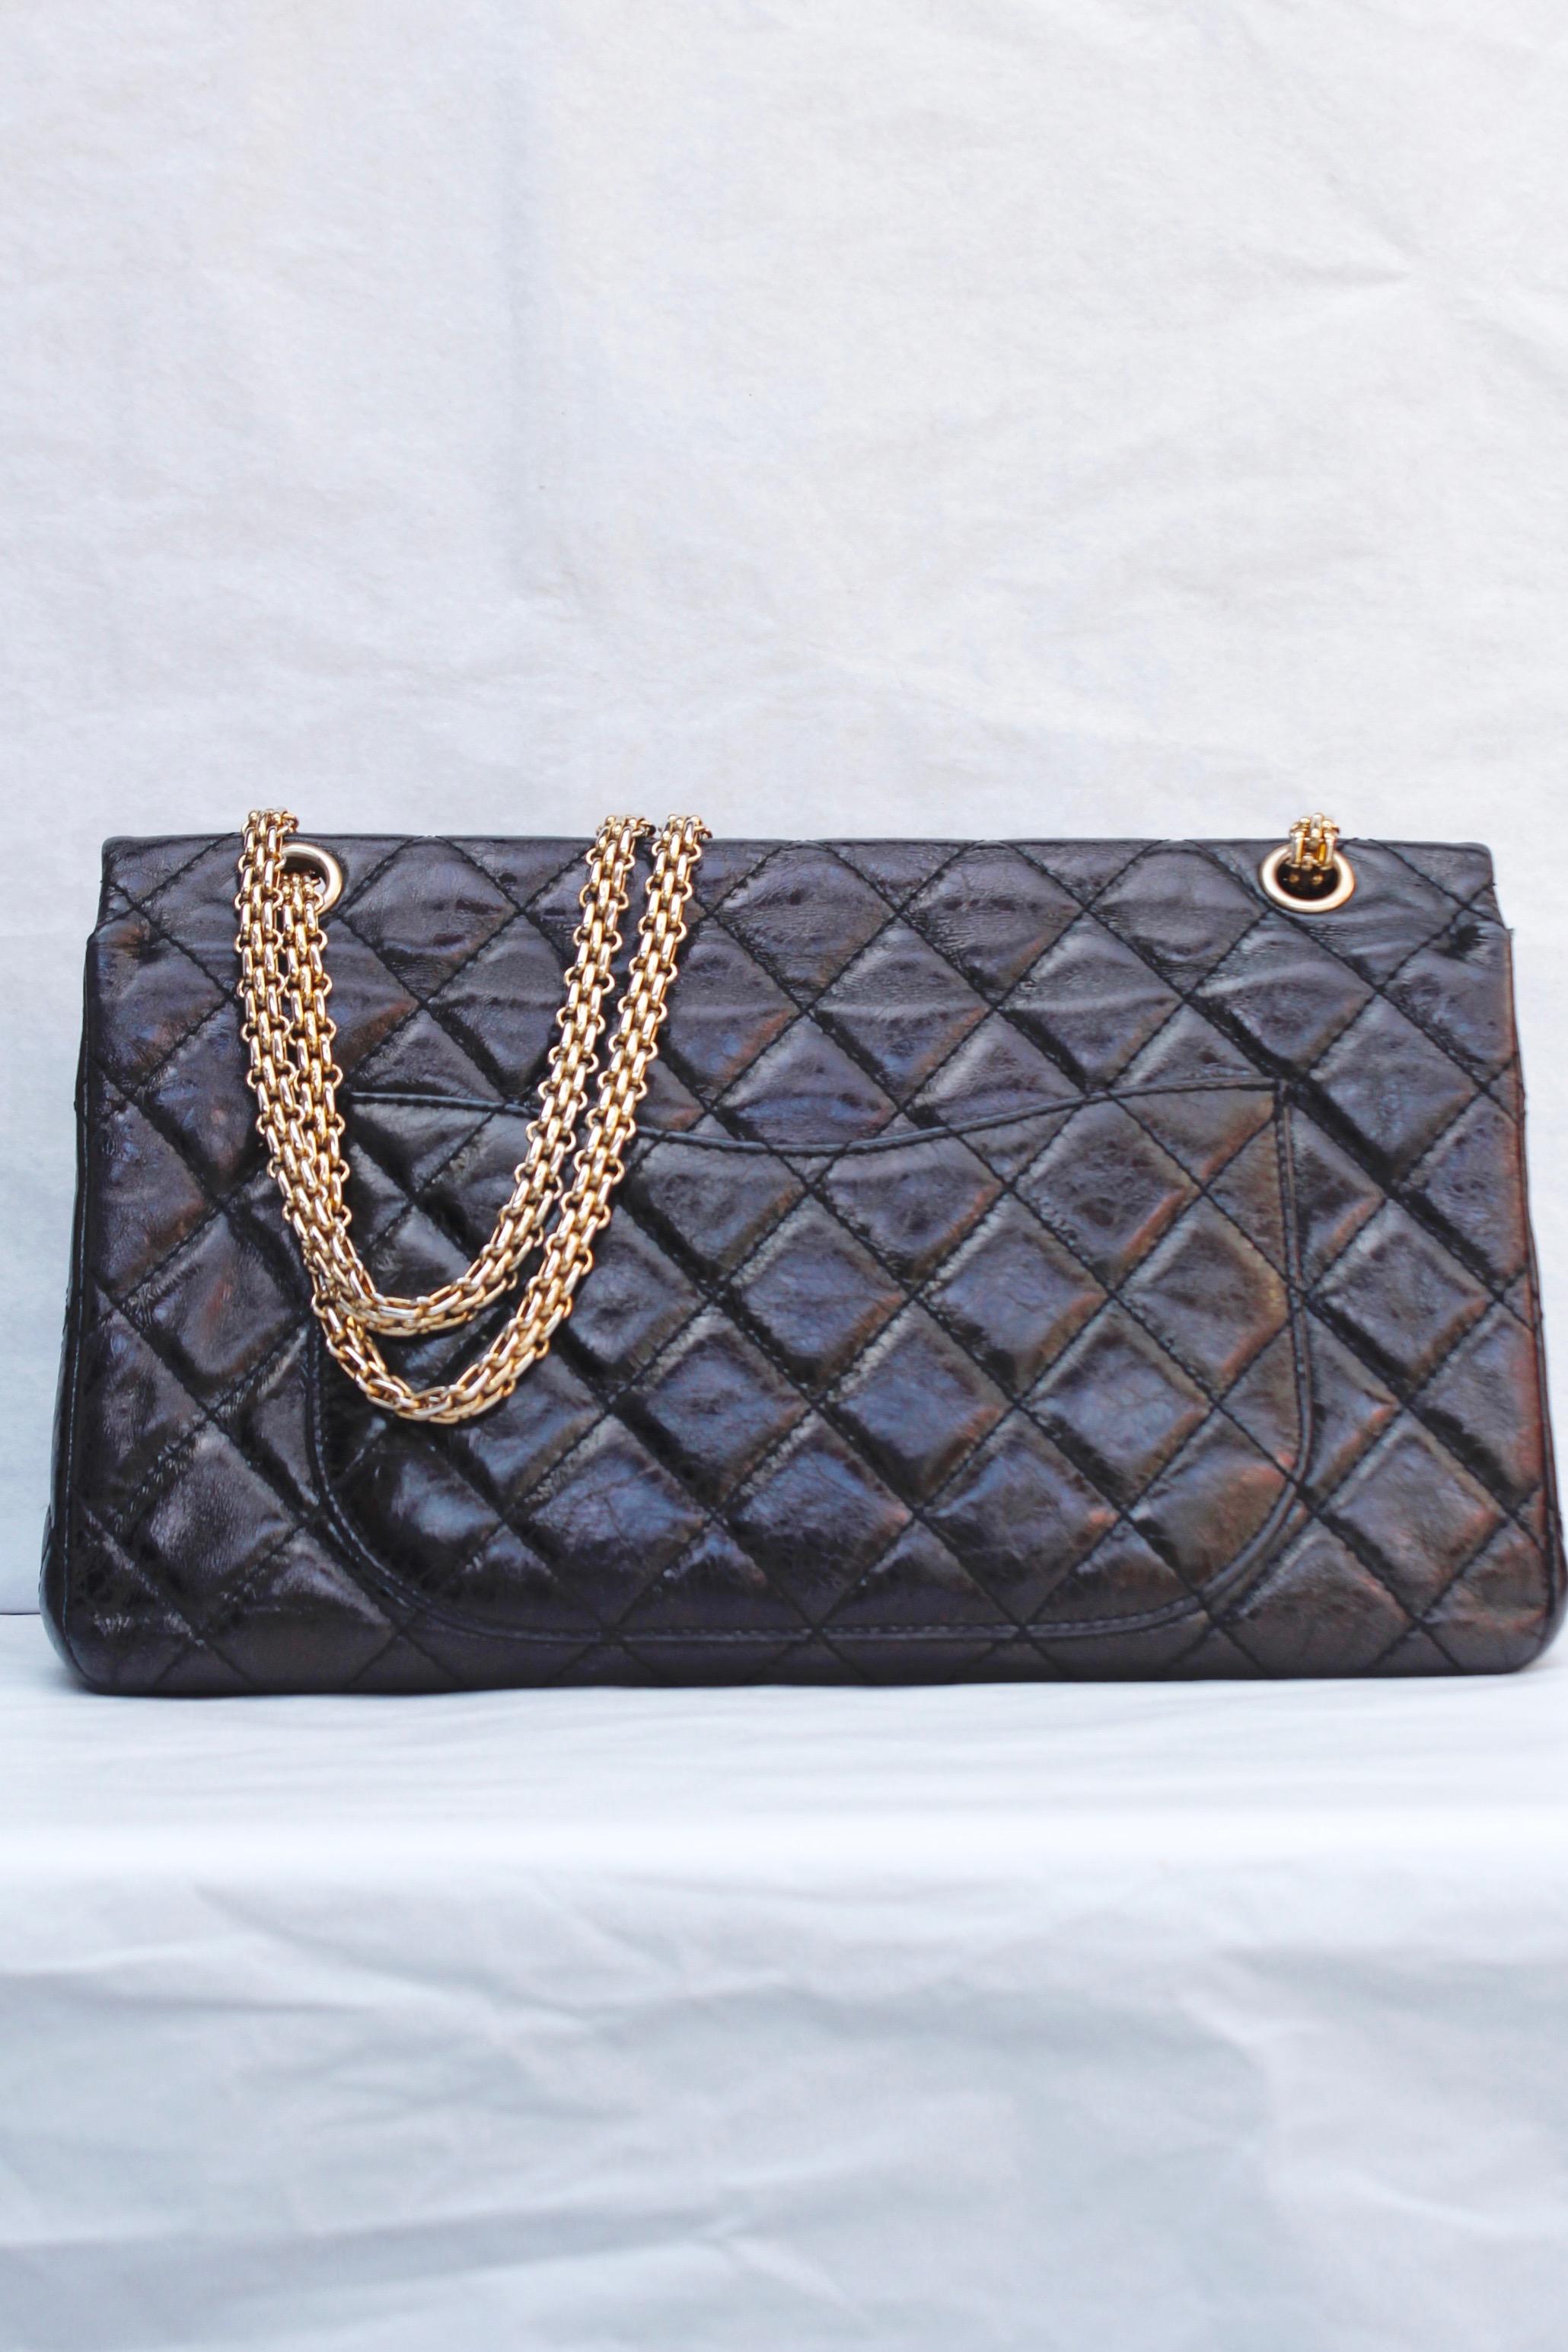 Chanel iconic cracked patent leather 2.55 bag, 2006/2008 In Good Condition For Sale In Paris, FR